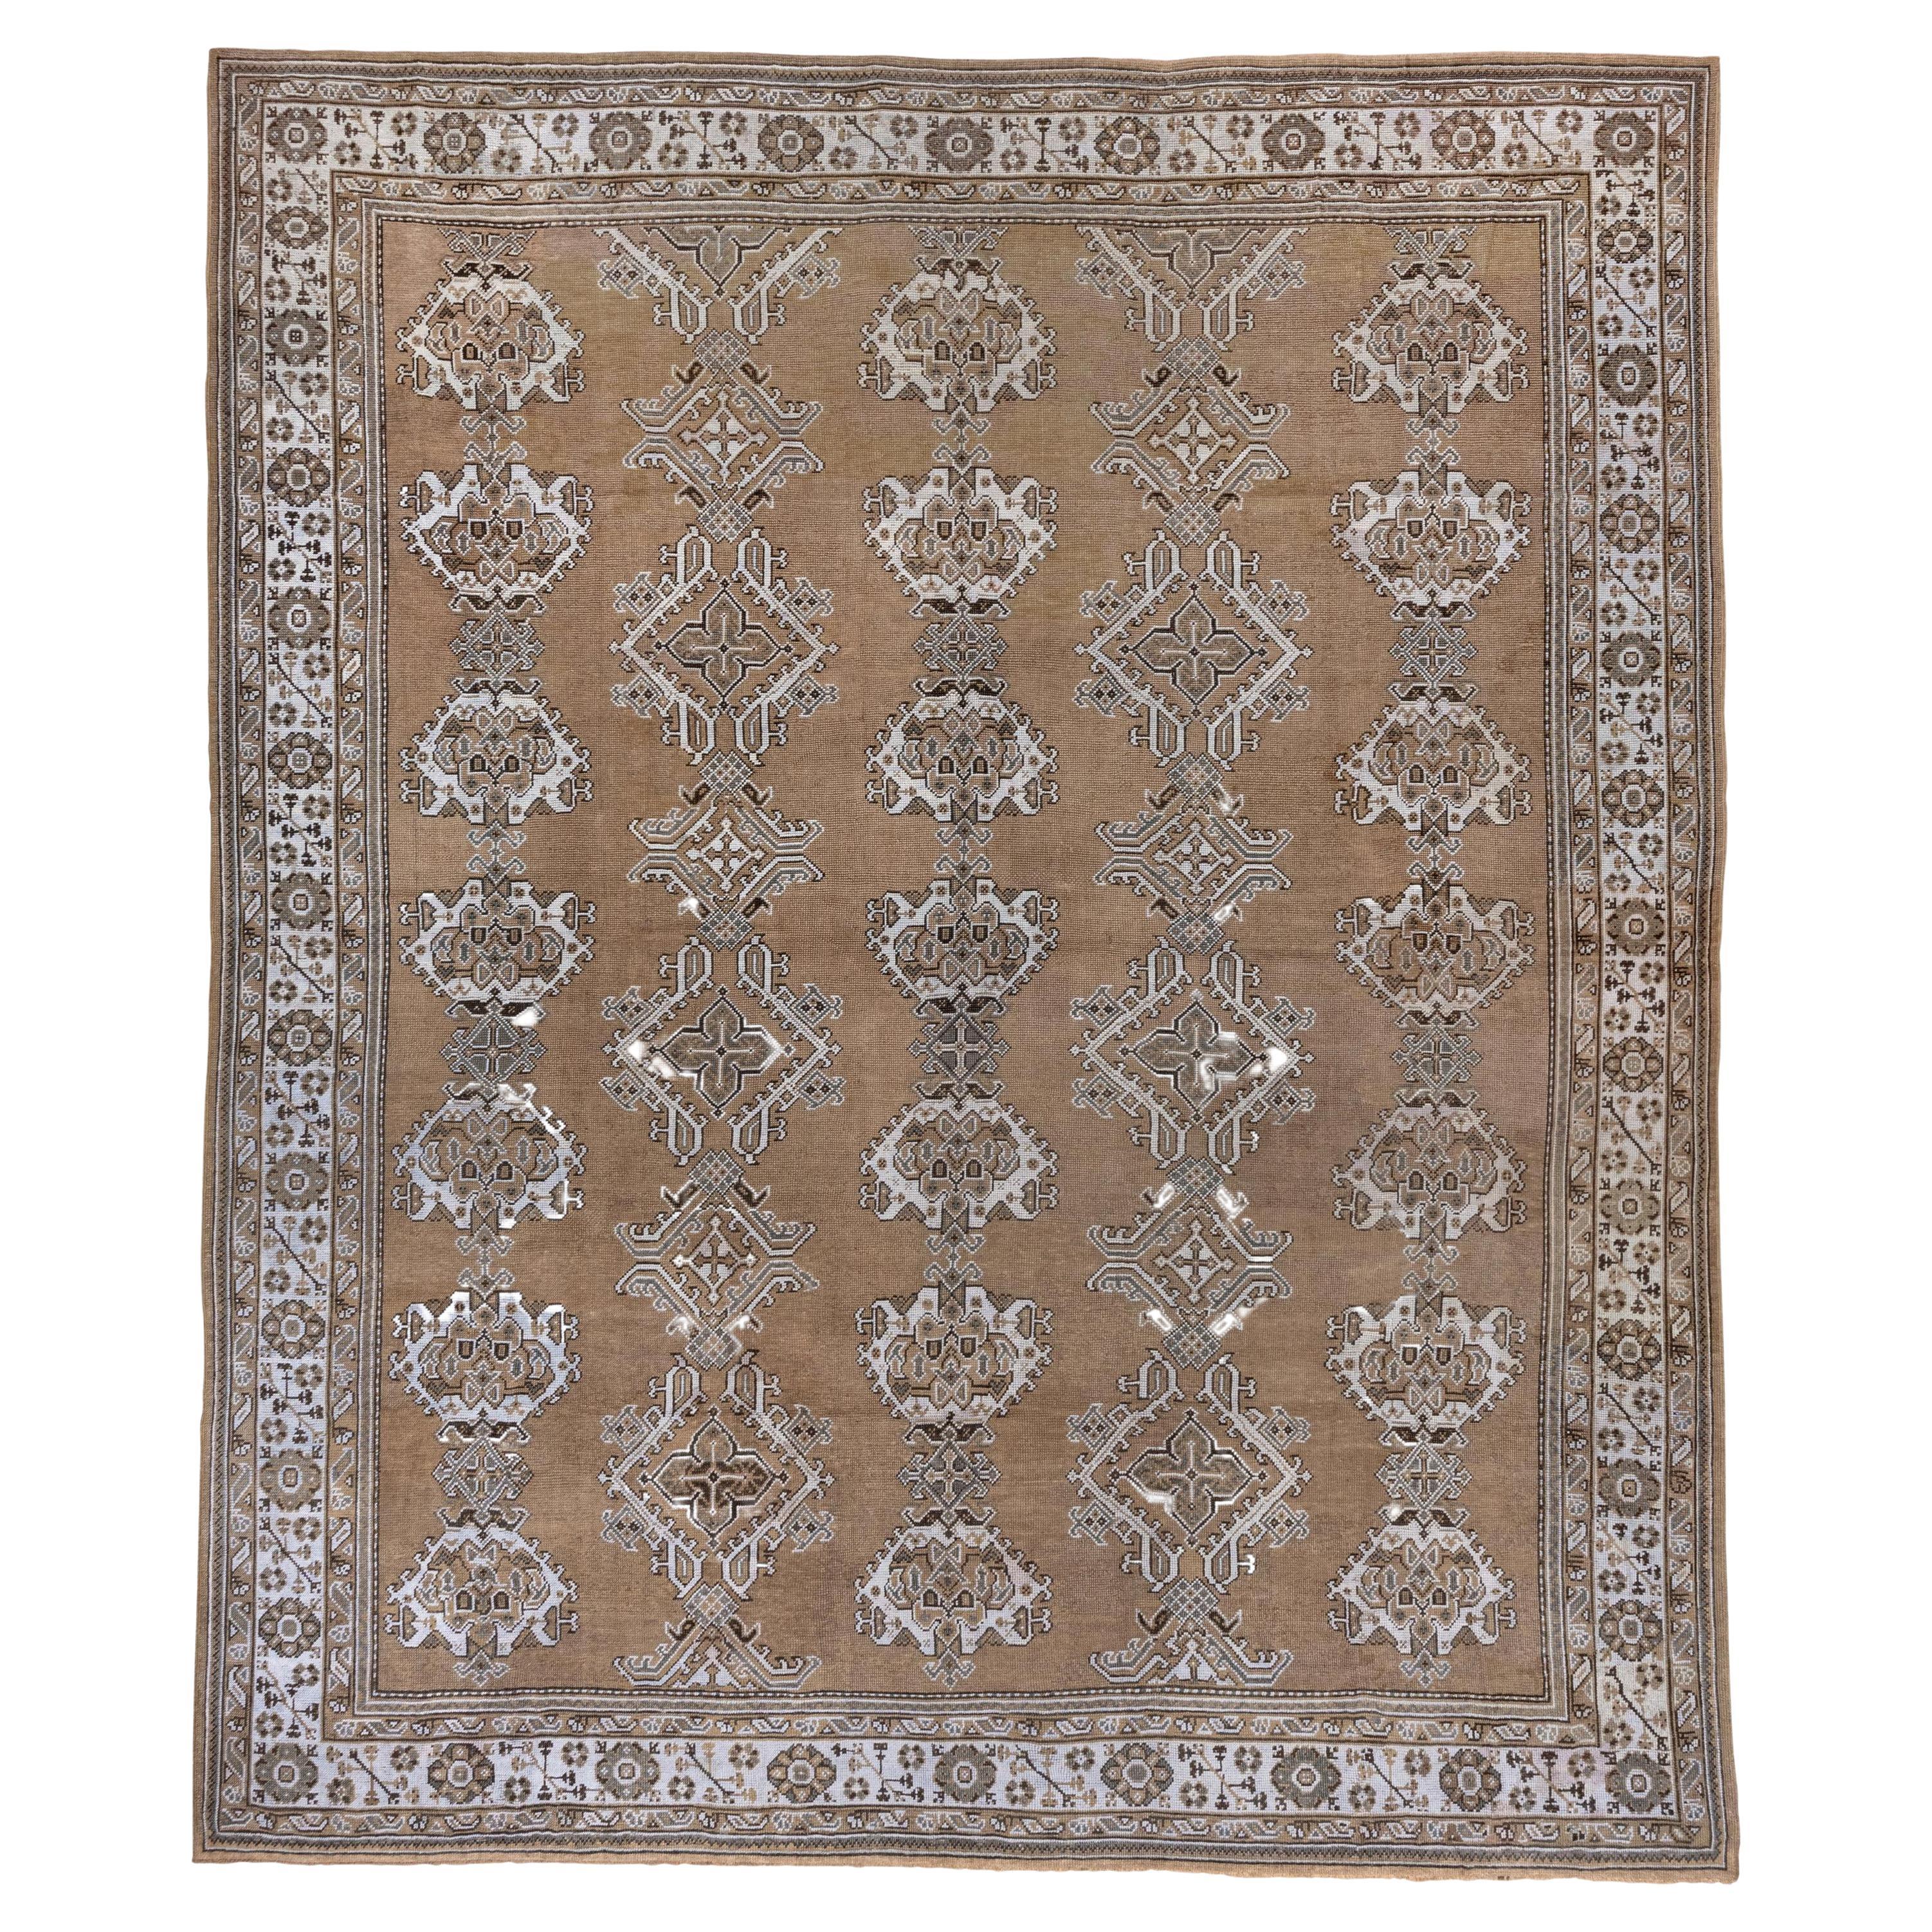 Antique Oushak Rug, Brown Field, Light Blue Borders and Motifs